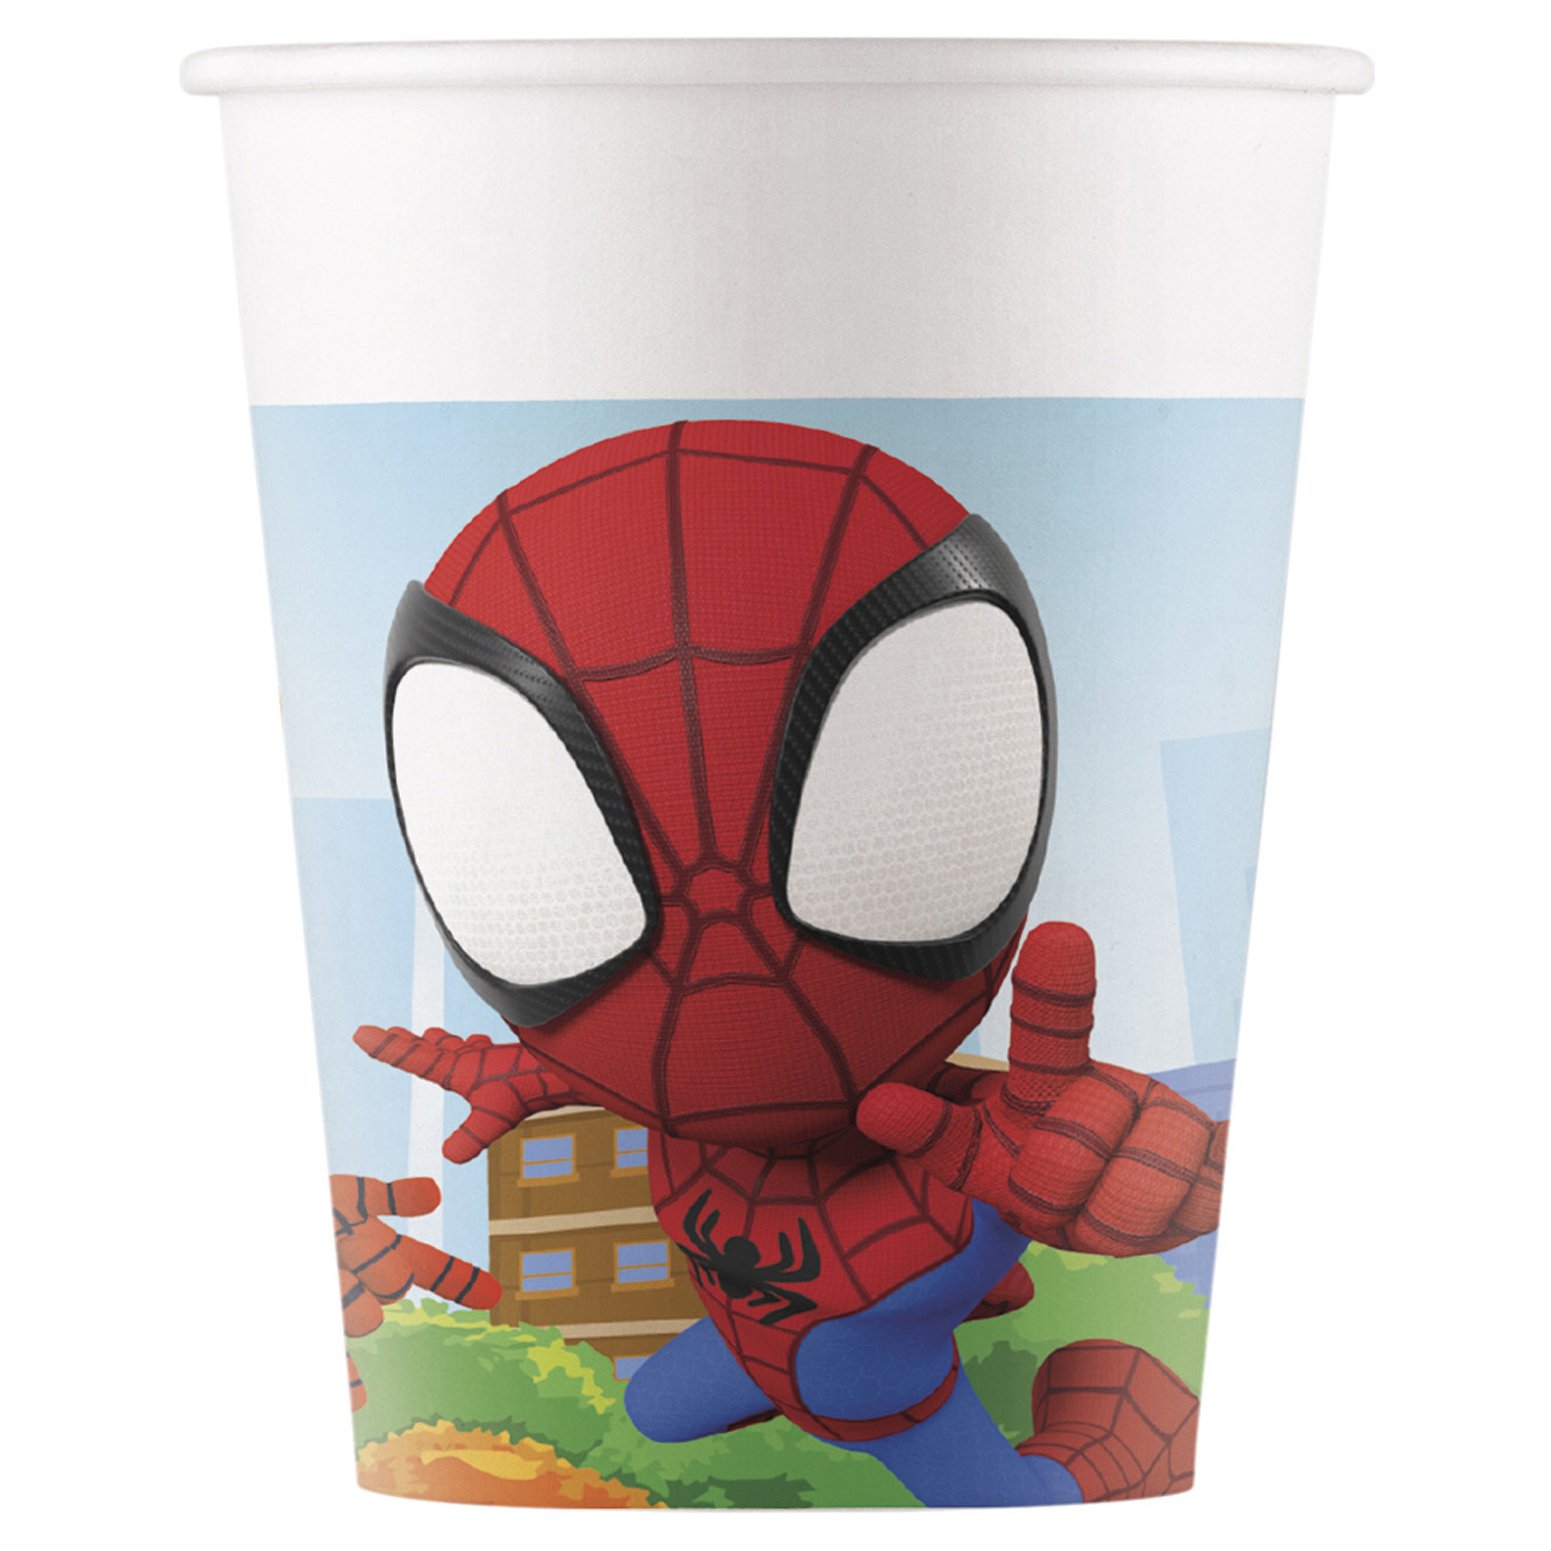 Spidey & His Amazing Friends Party Tableware & Decorations Bundle - 16 Guests